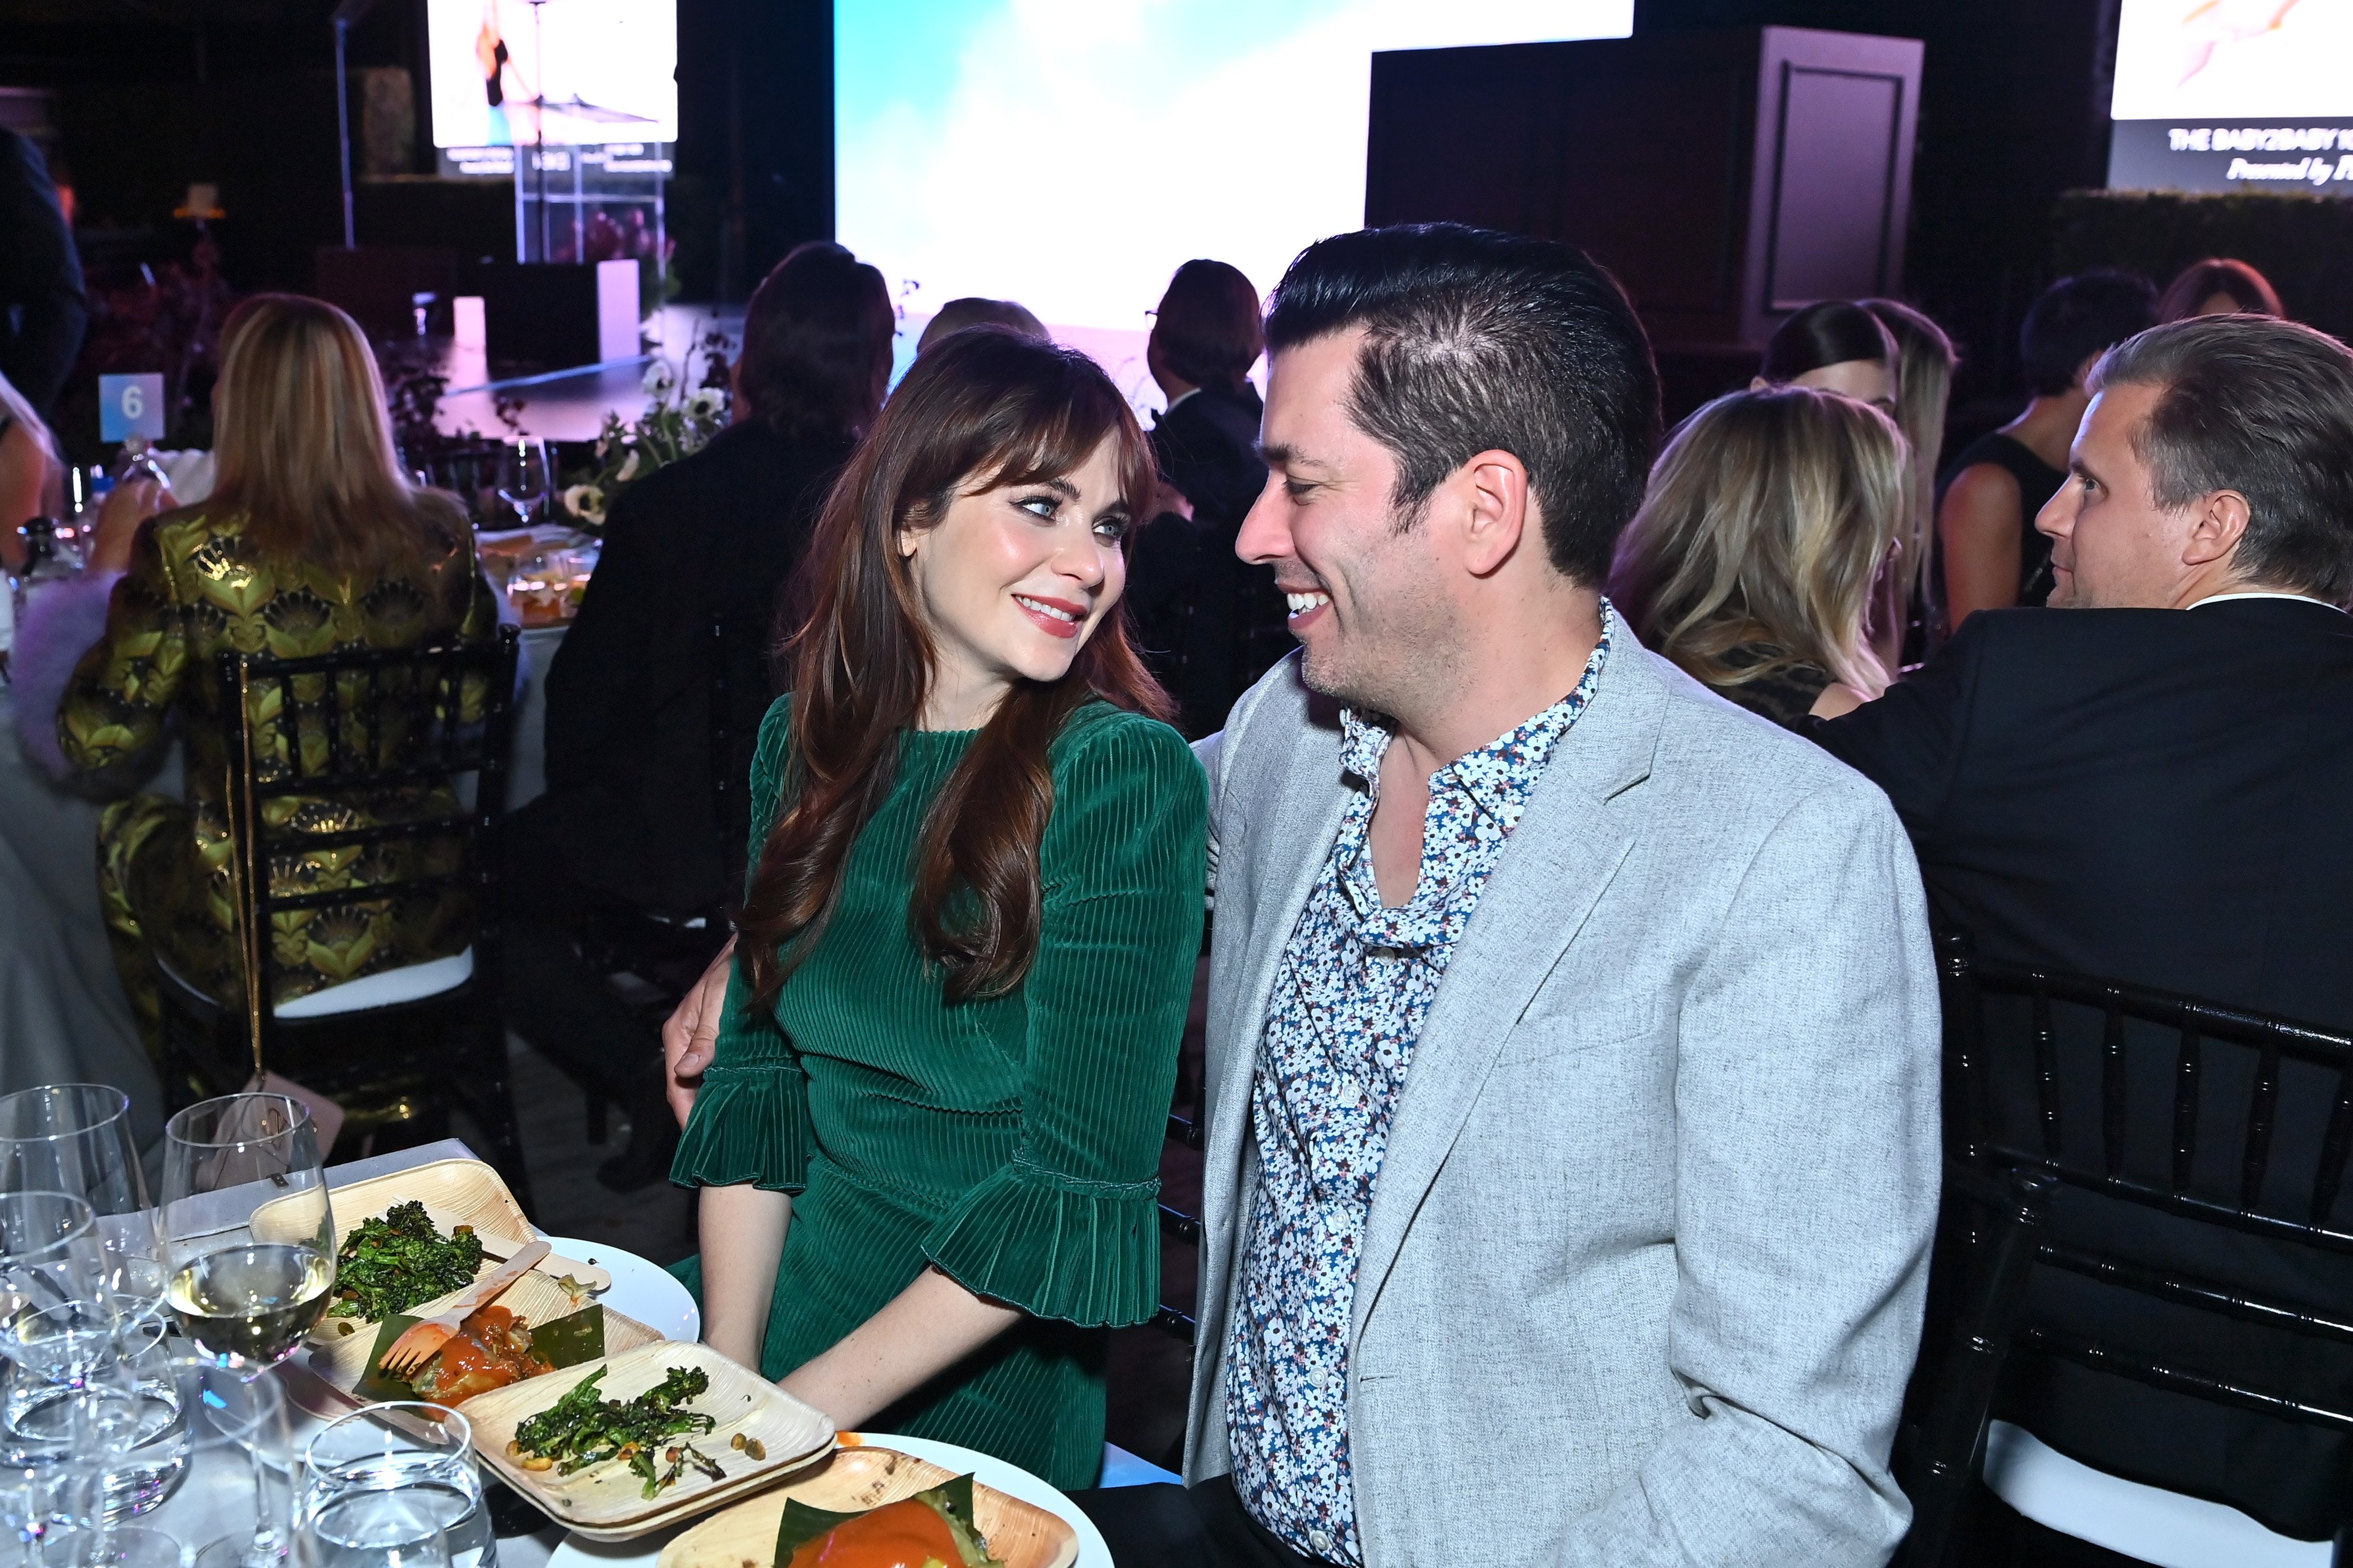 Zooey Deschanel and Jonathan Scott during the Baby2Baby 10-Year Gala on November 13, 2021 in West Hollywood, California. / Source: Getty Images